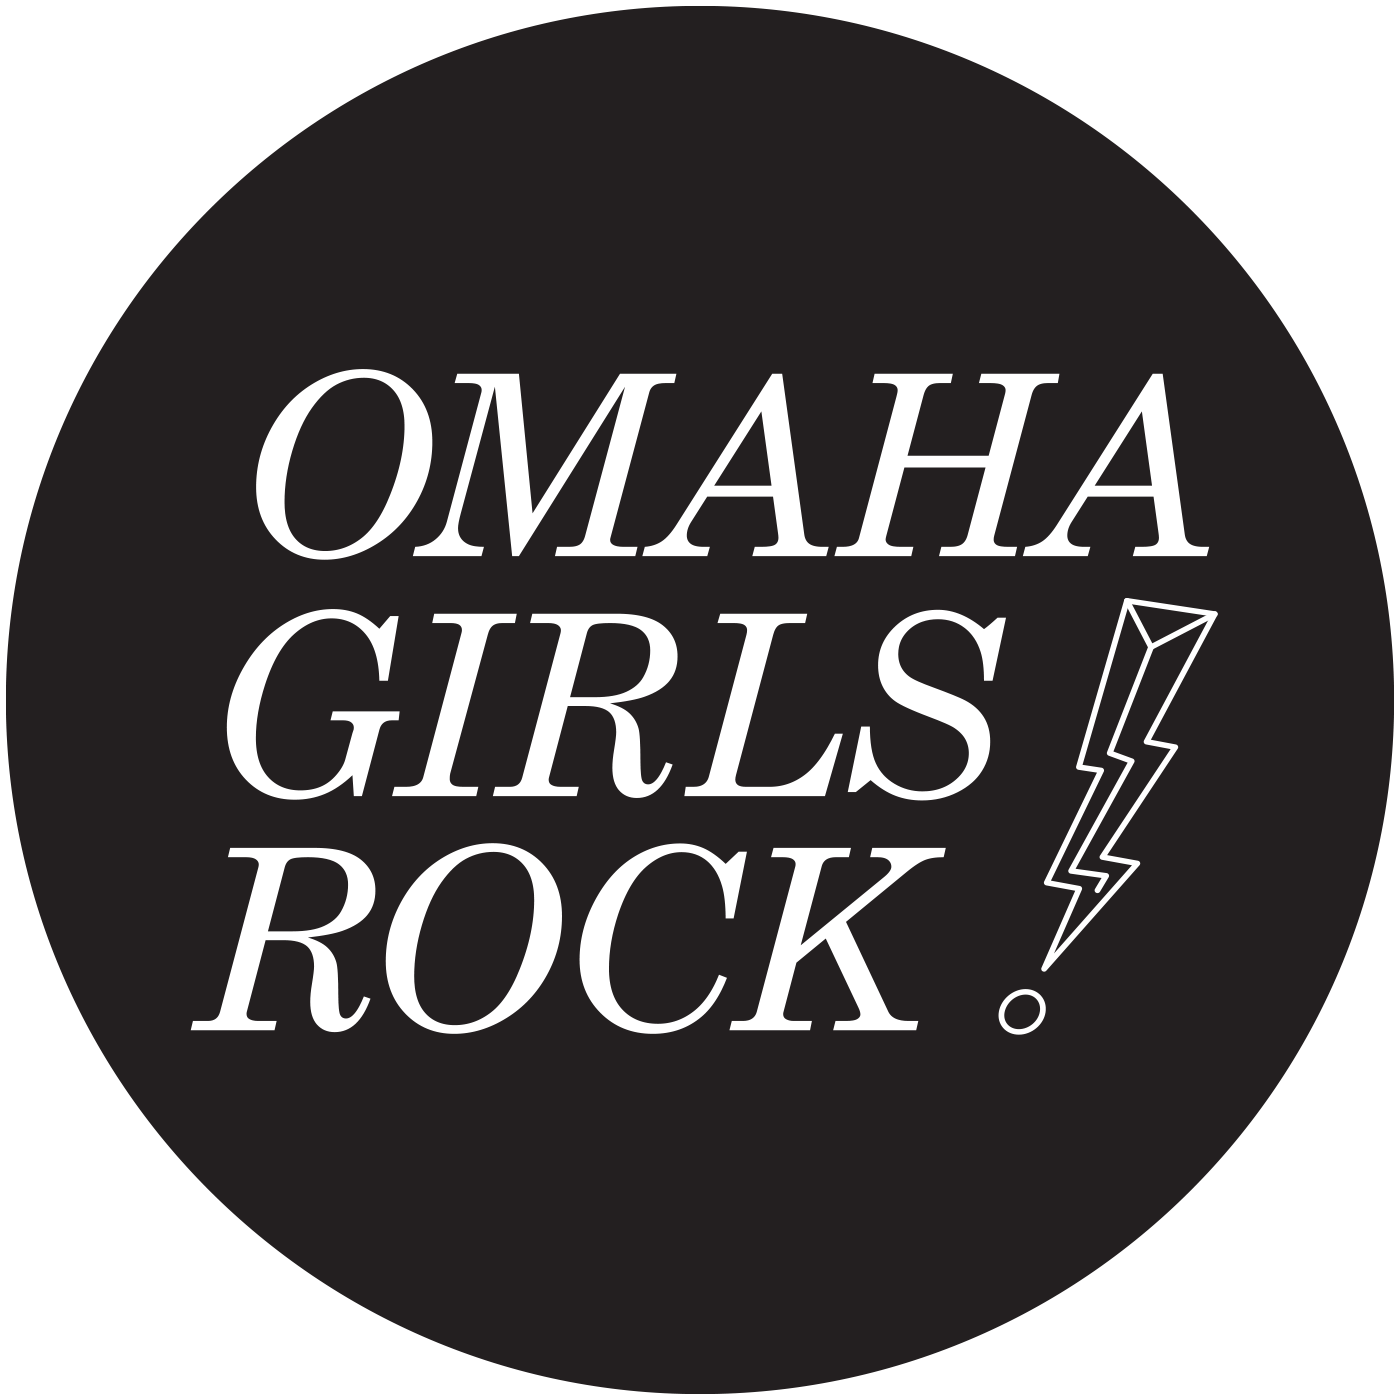 Omaha Girls Rock logo with white text over black background